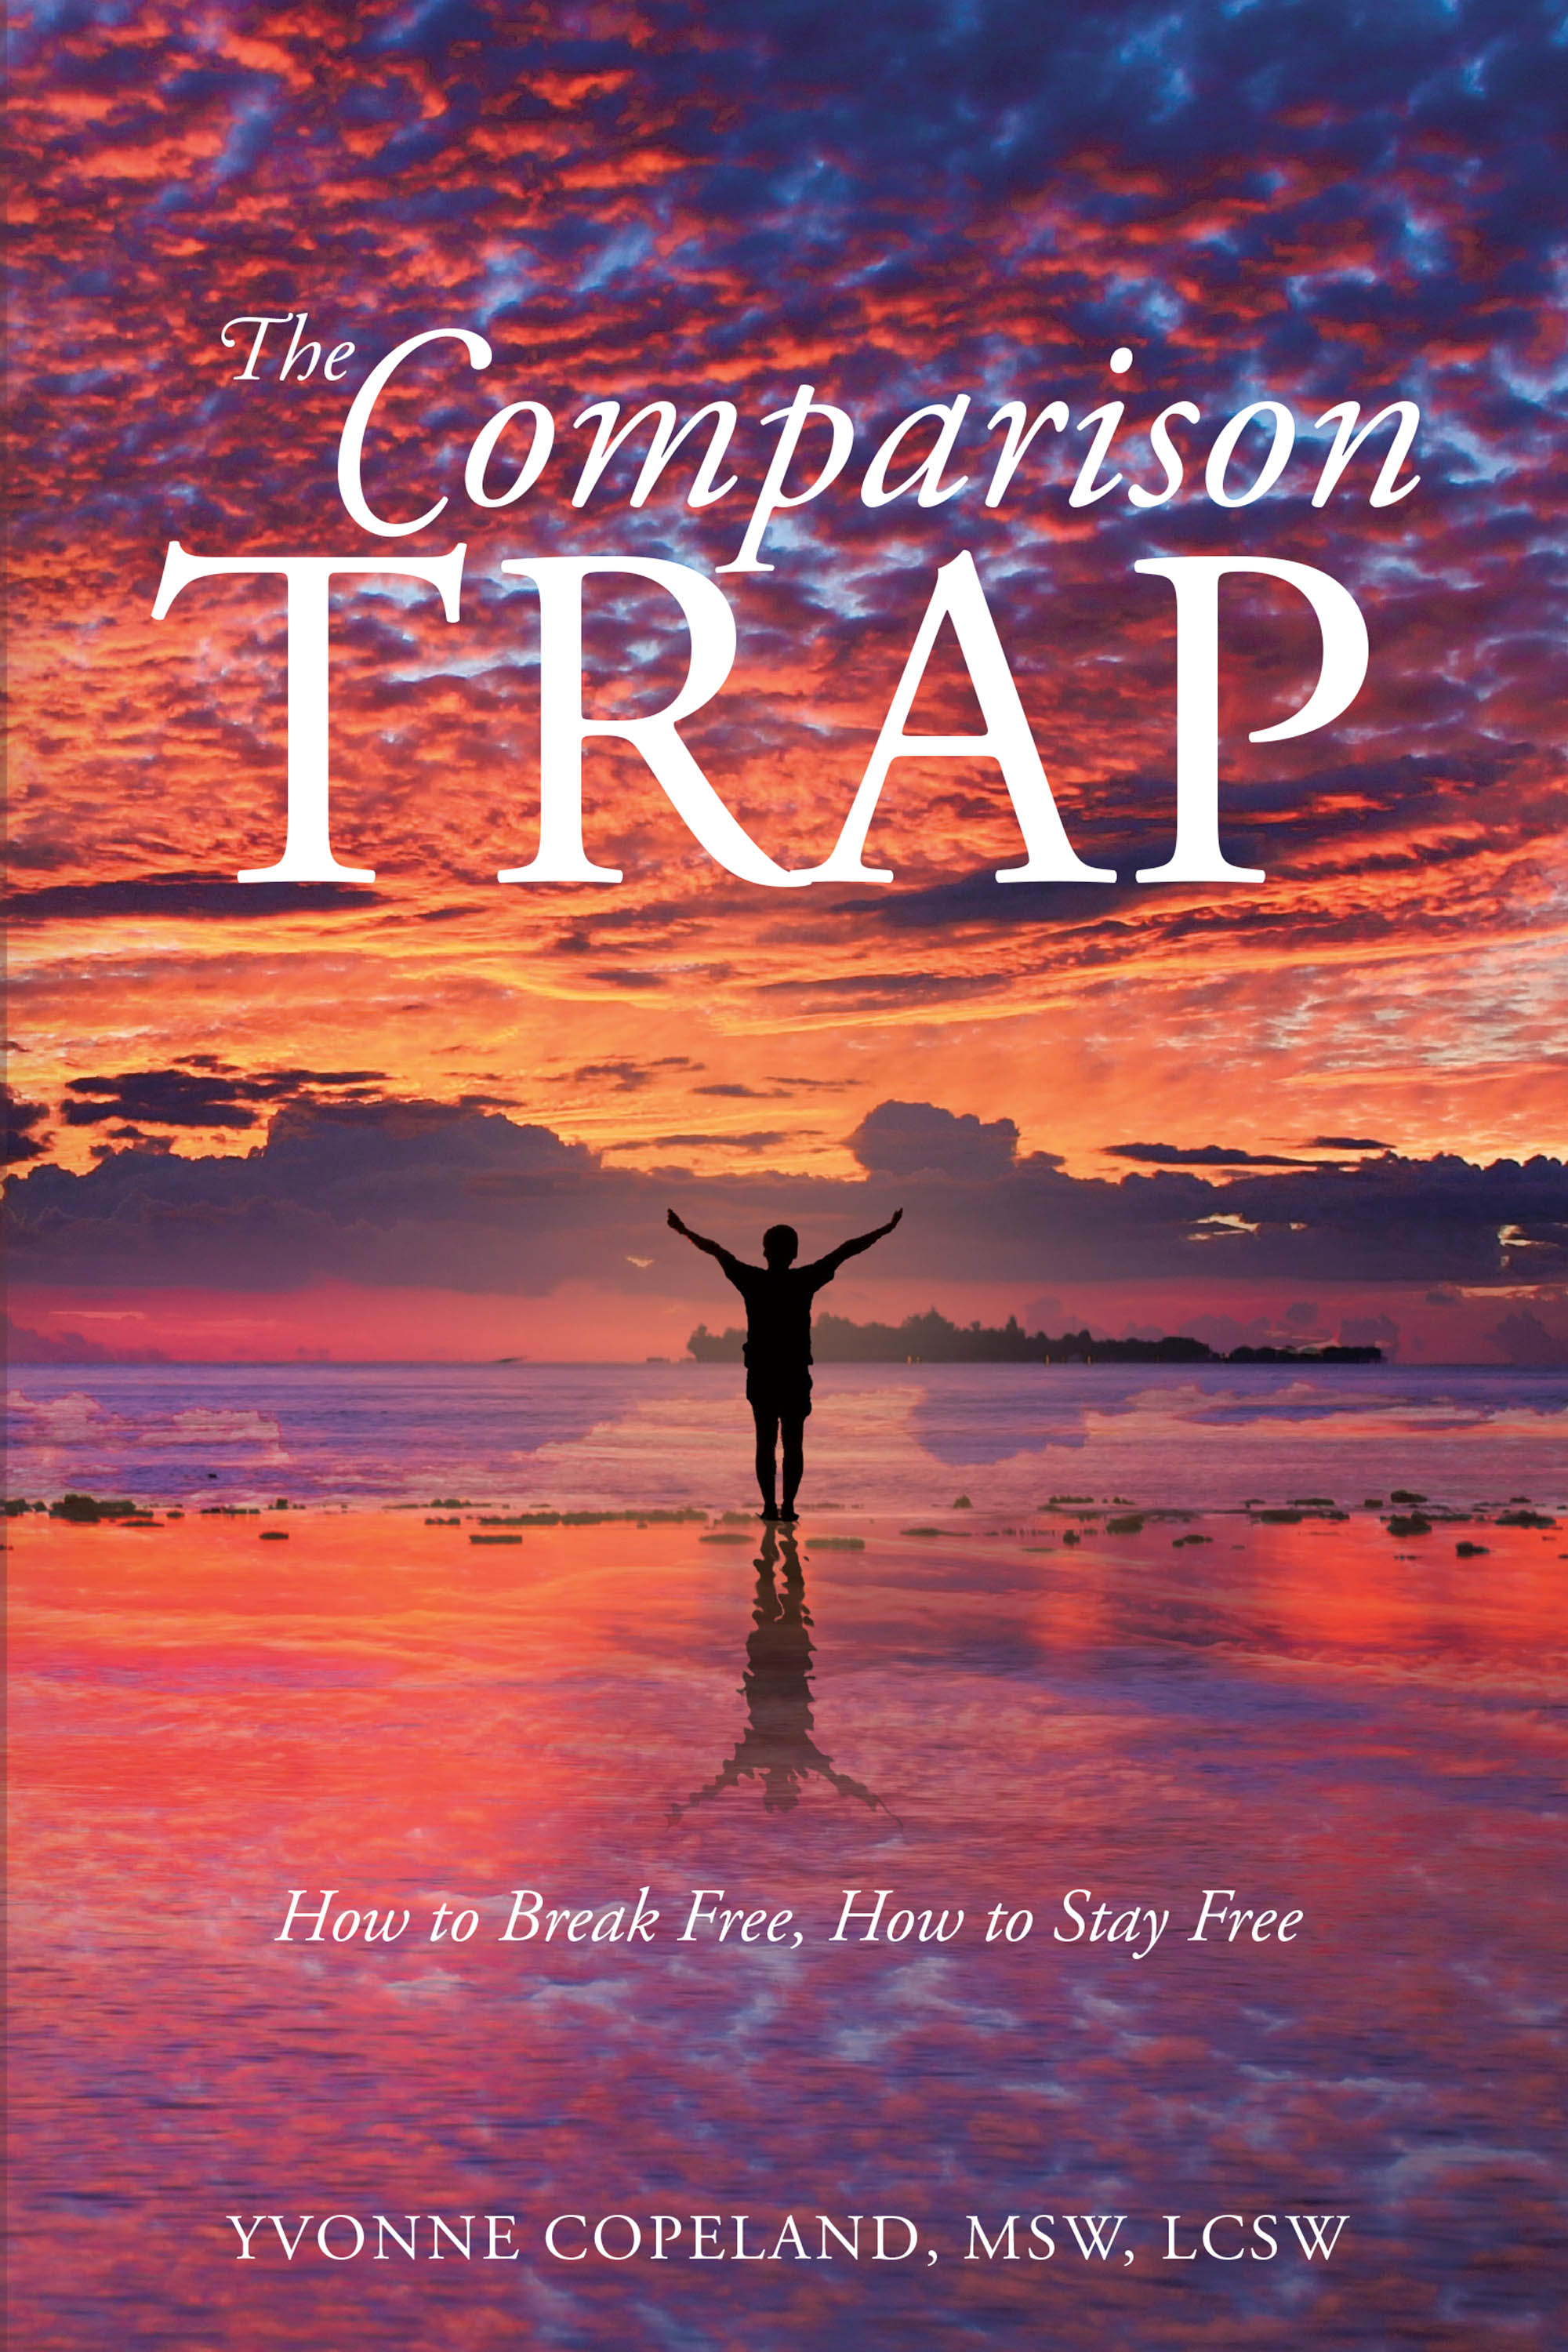 Yvonne Copeland, MSW, LCSW’s Newly Released “The Comparison Trap: How to Break Free, How to Stay Free” Tackles the Topic of Comparison Head-on